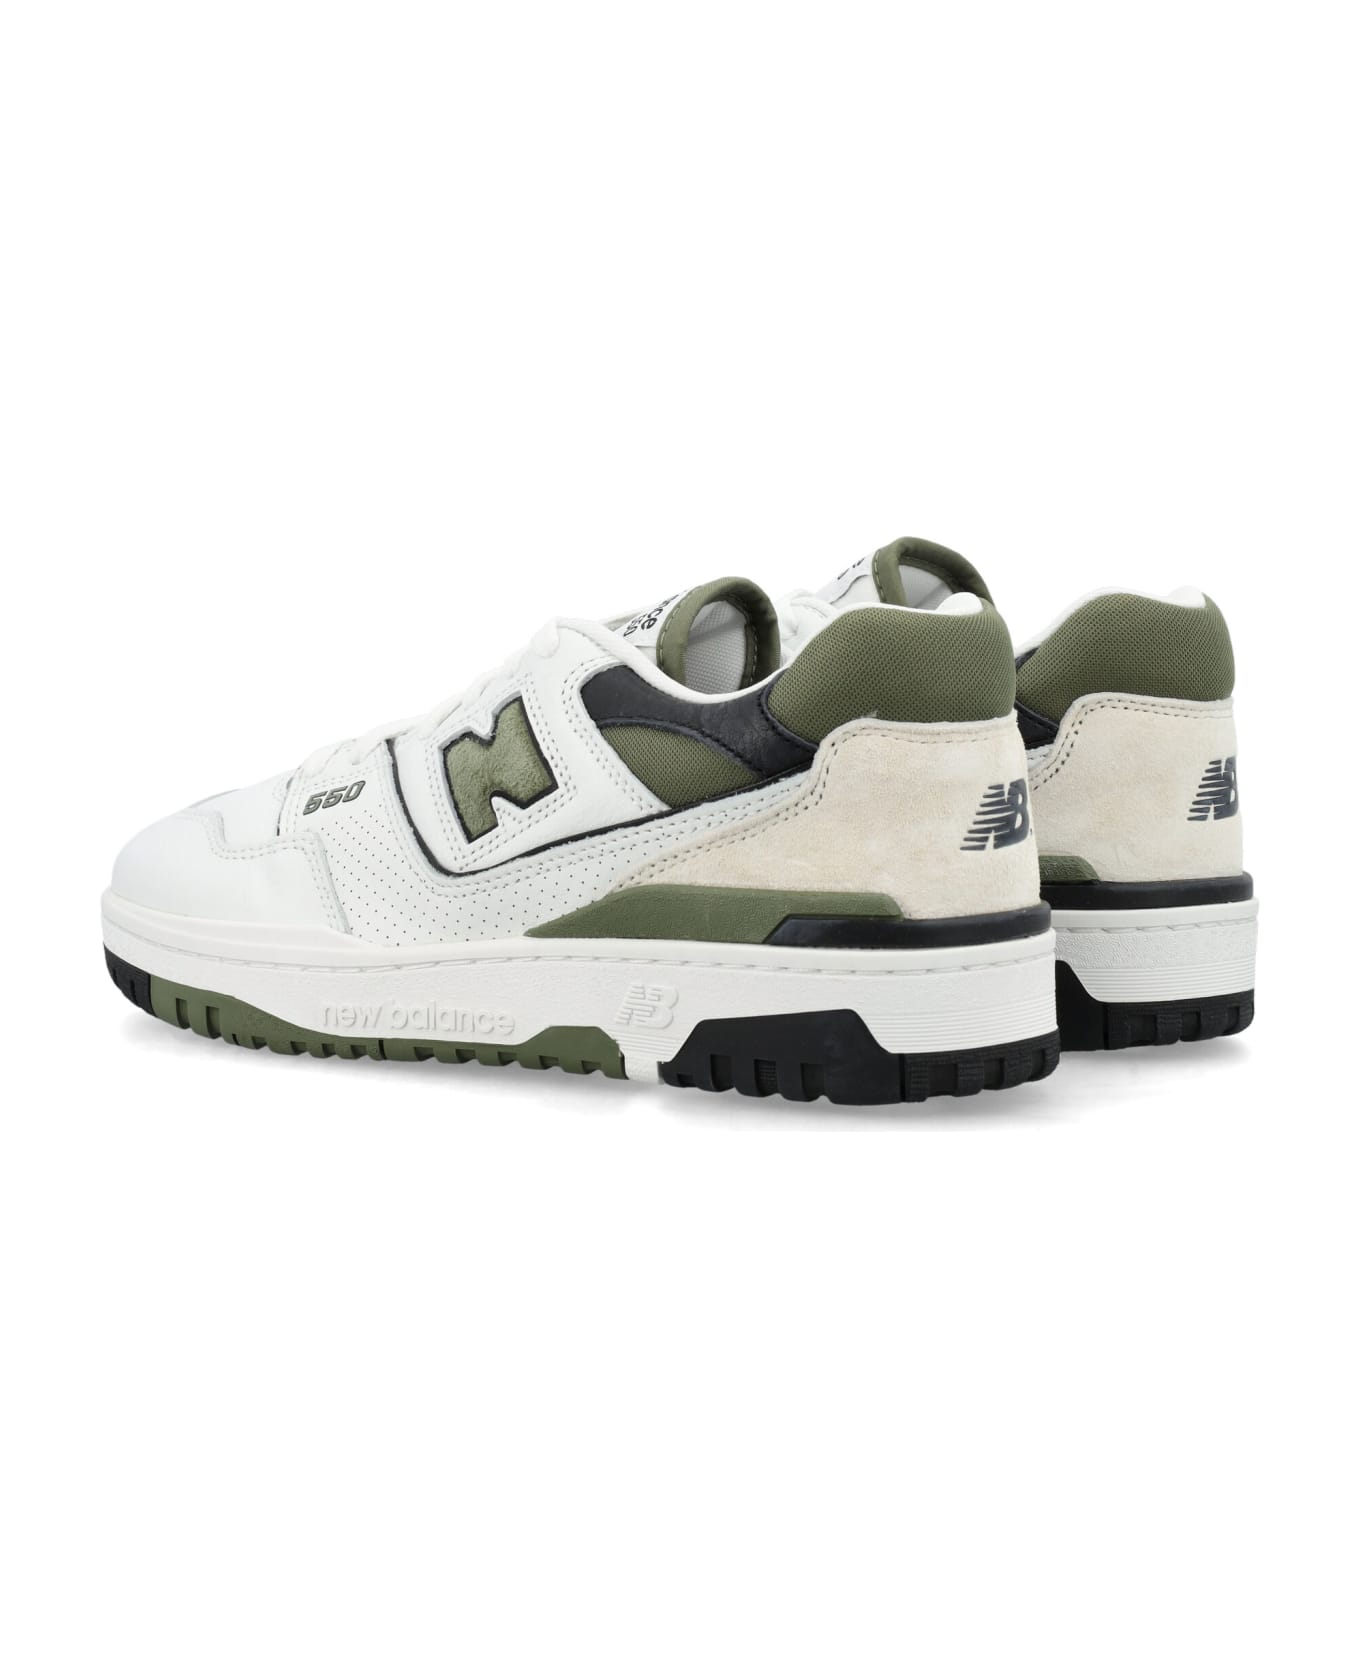 New Balance 550 Sneakers - WHITE OLIVE